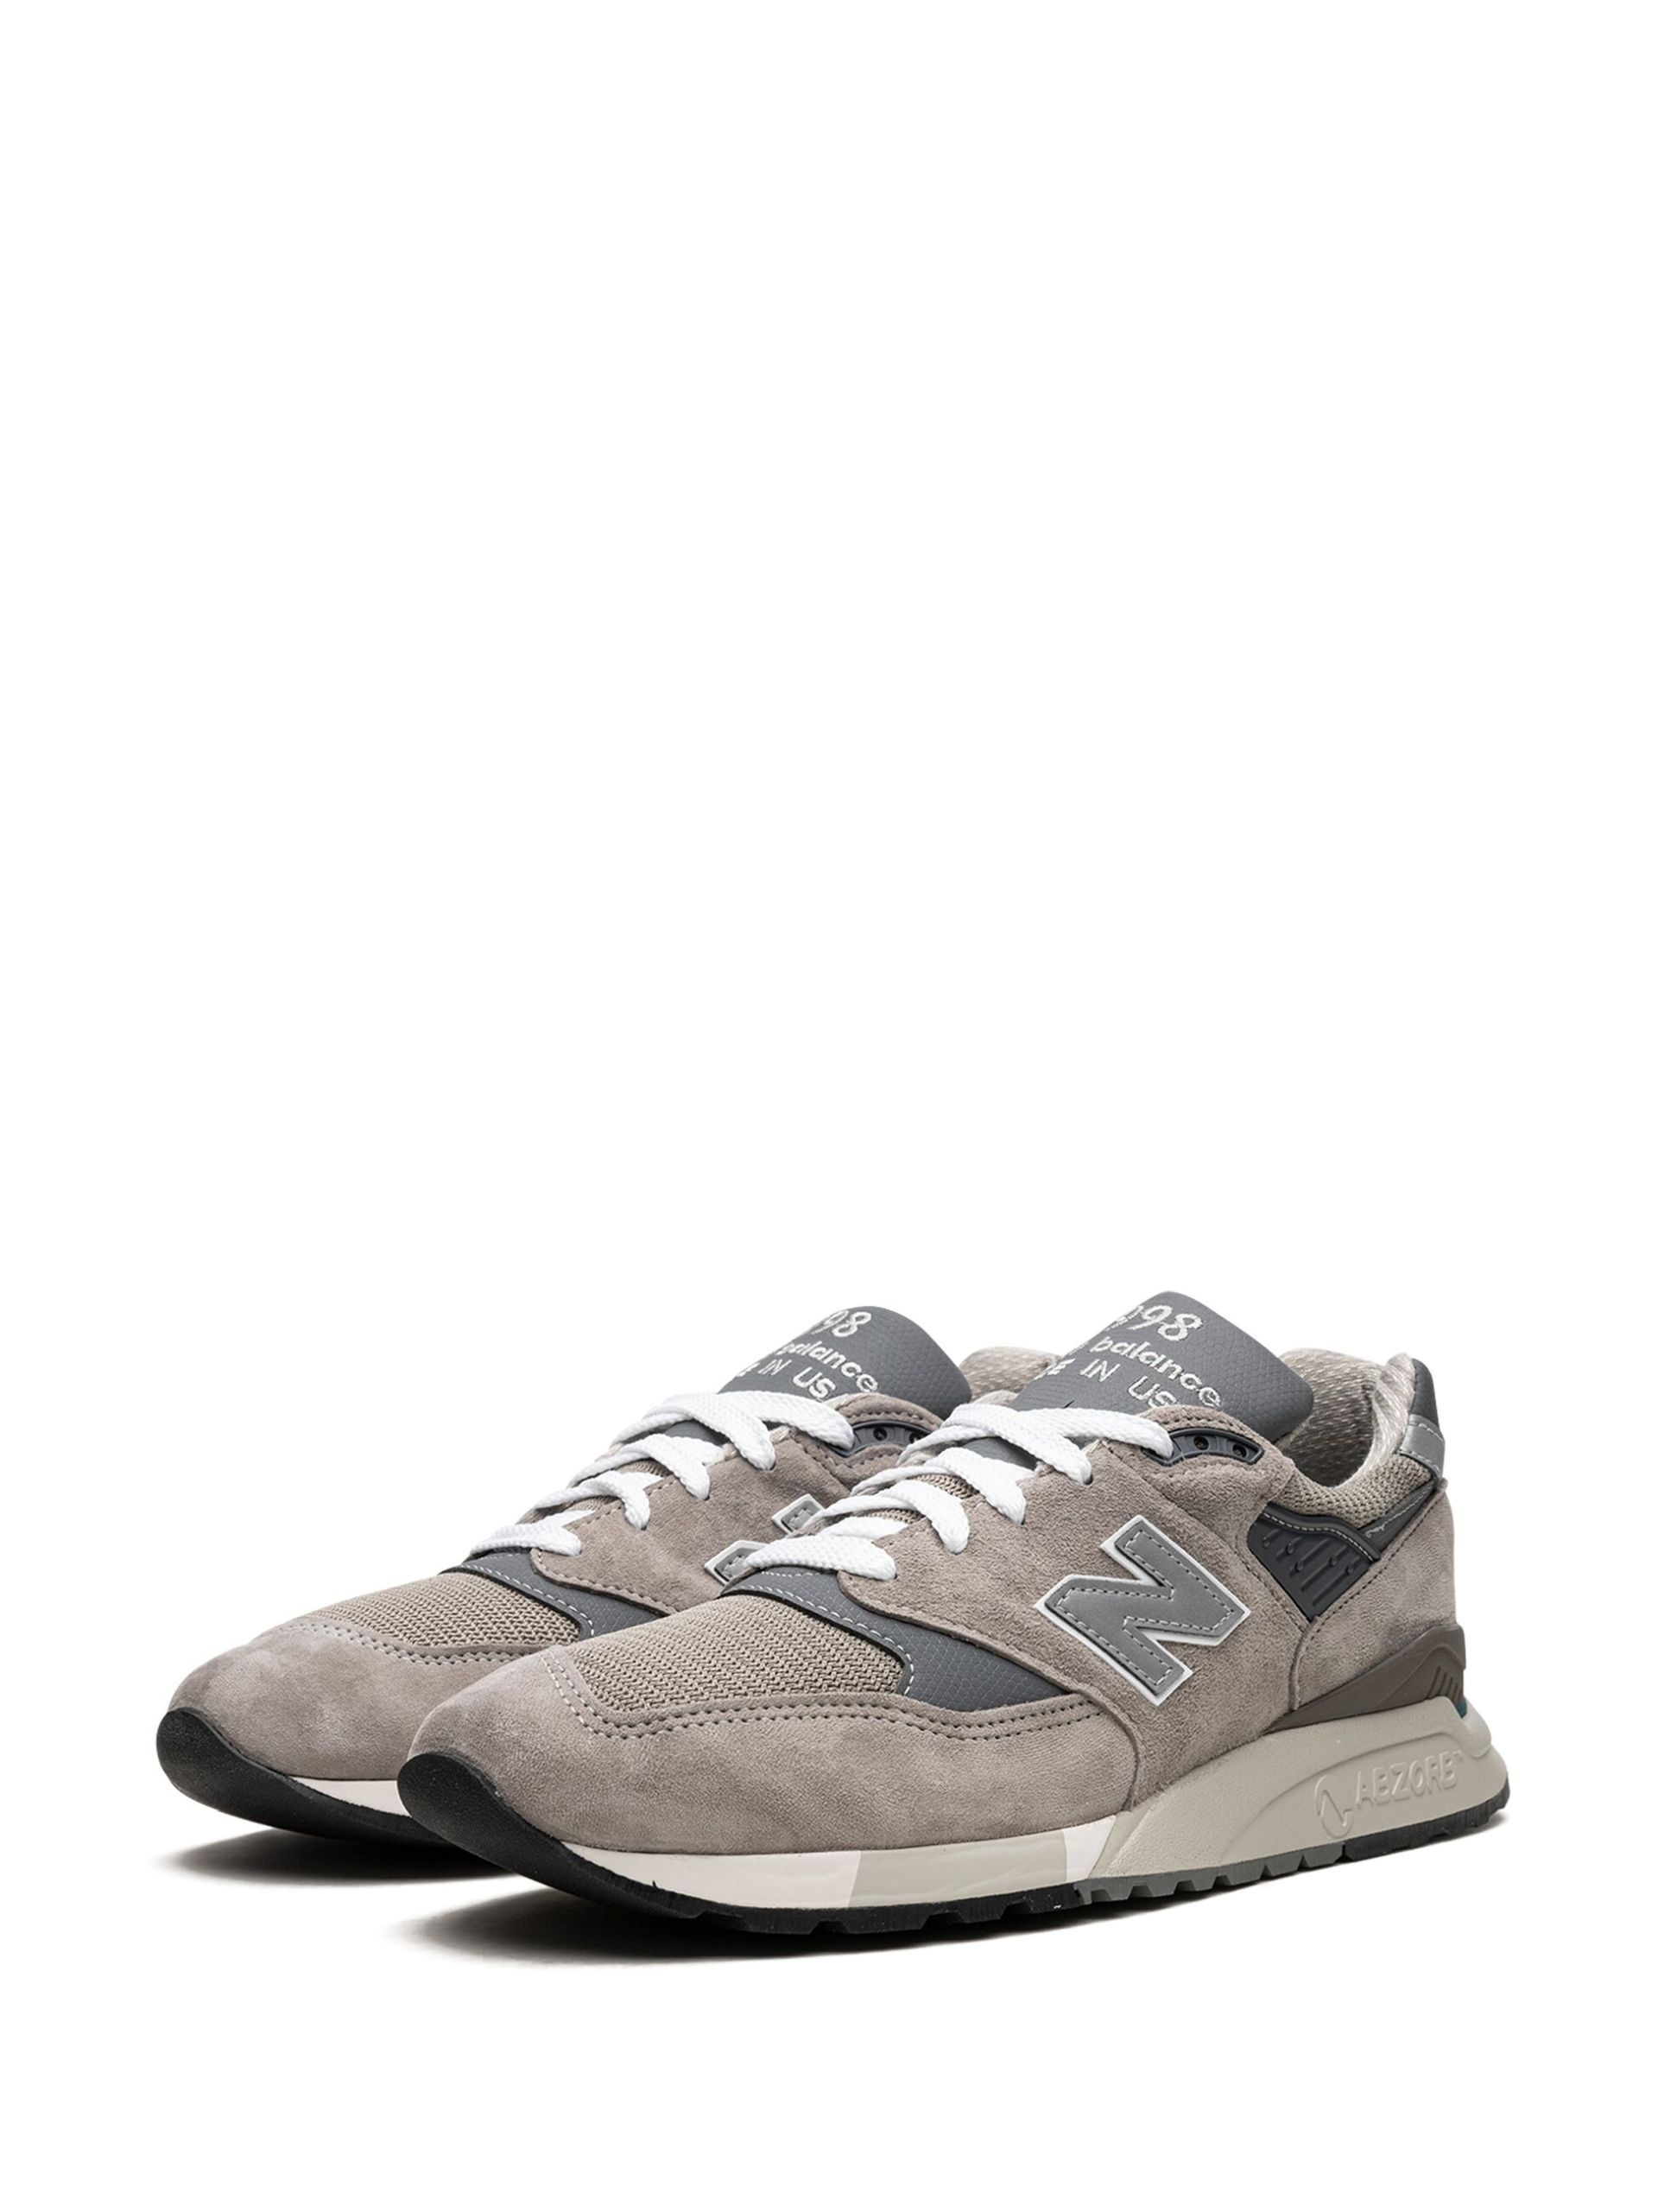 Grey 998 Made In USA Suede Sneakers - 5